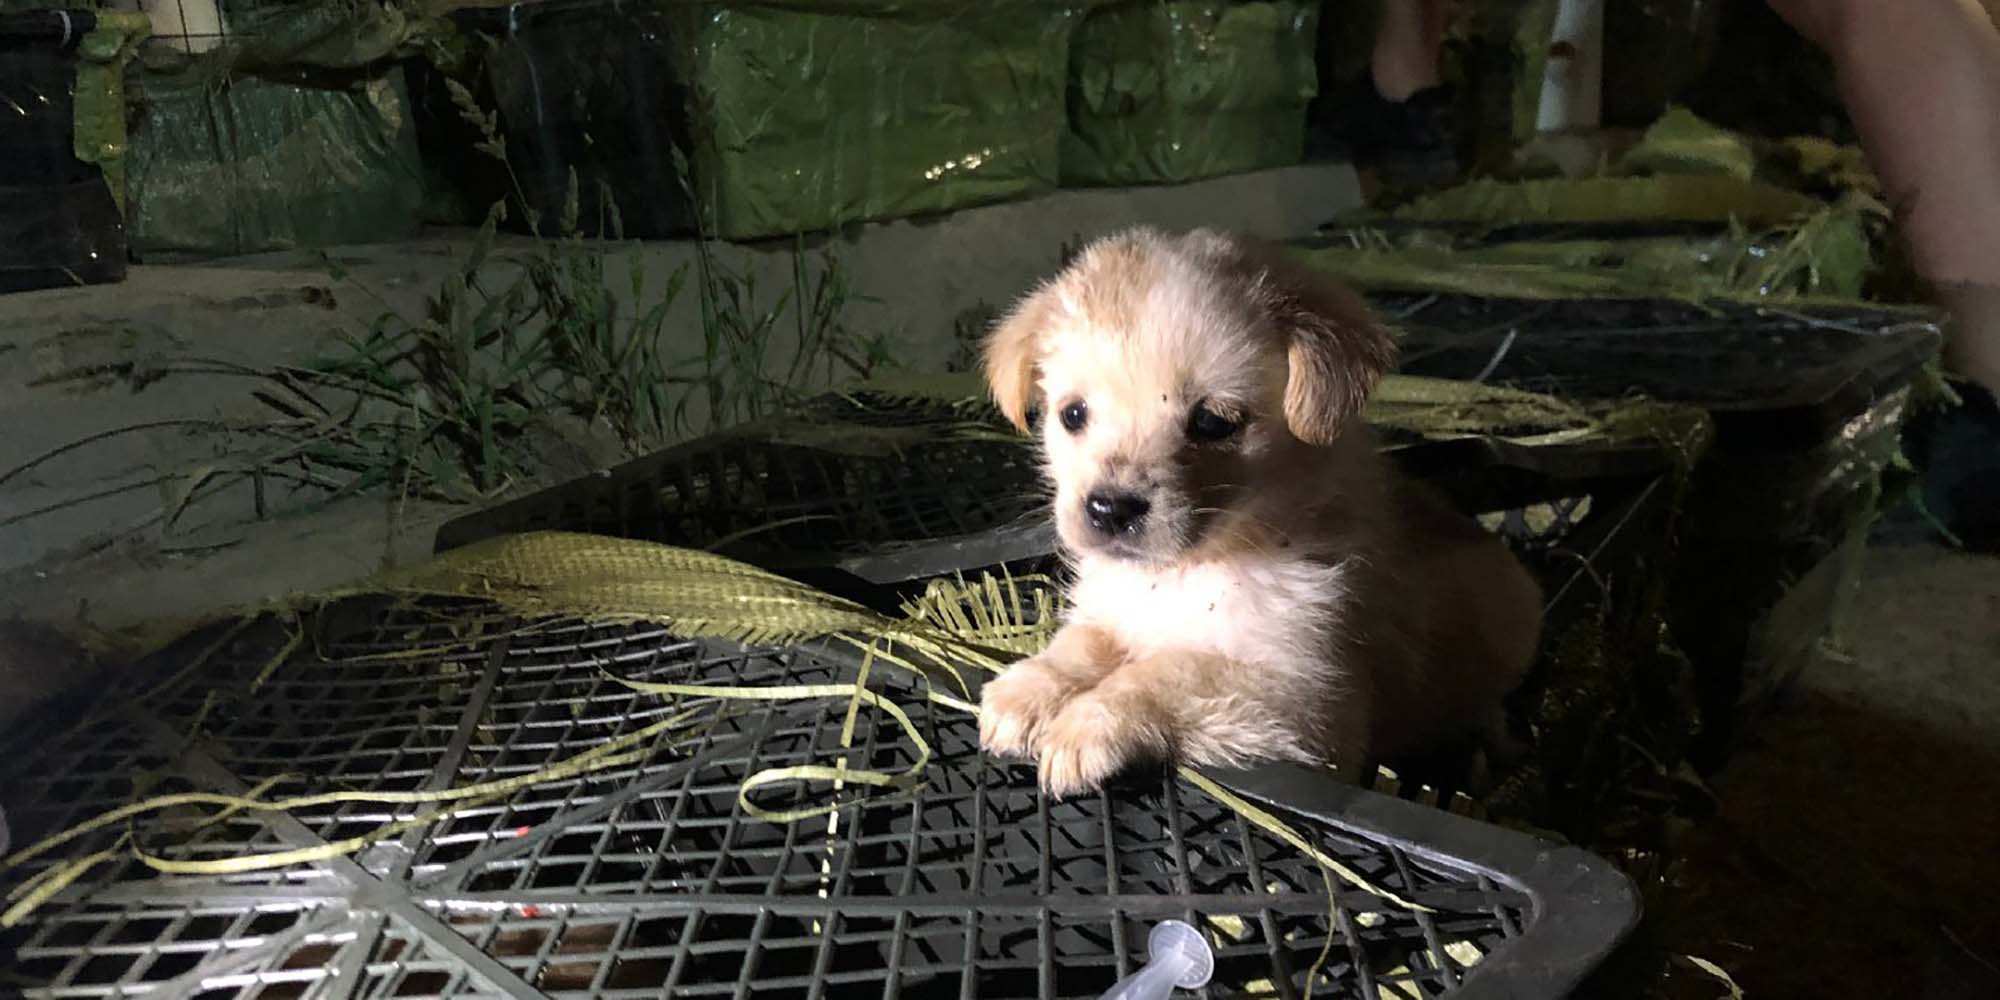 How China’s “blind box” craze led to dead dogs and cats inside crates